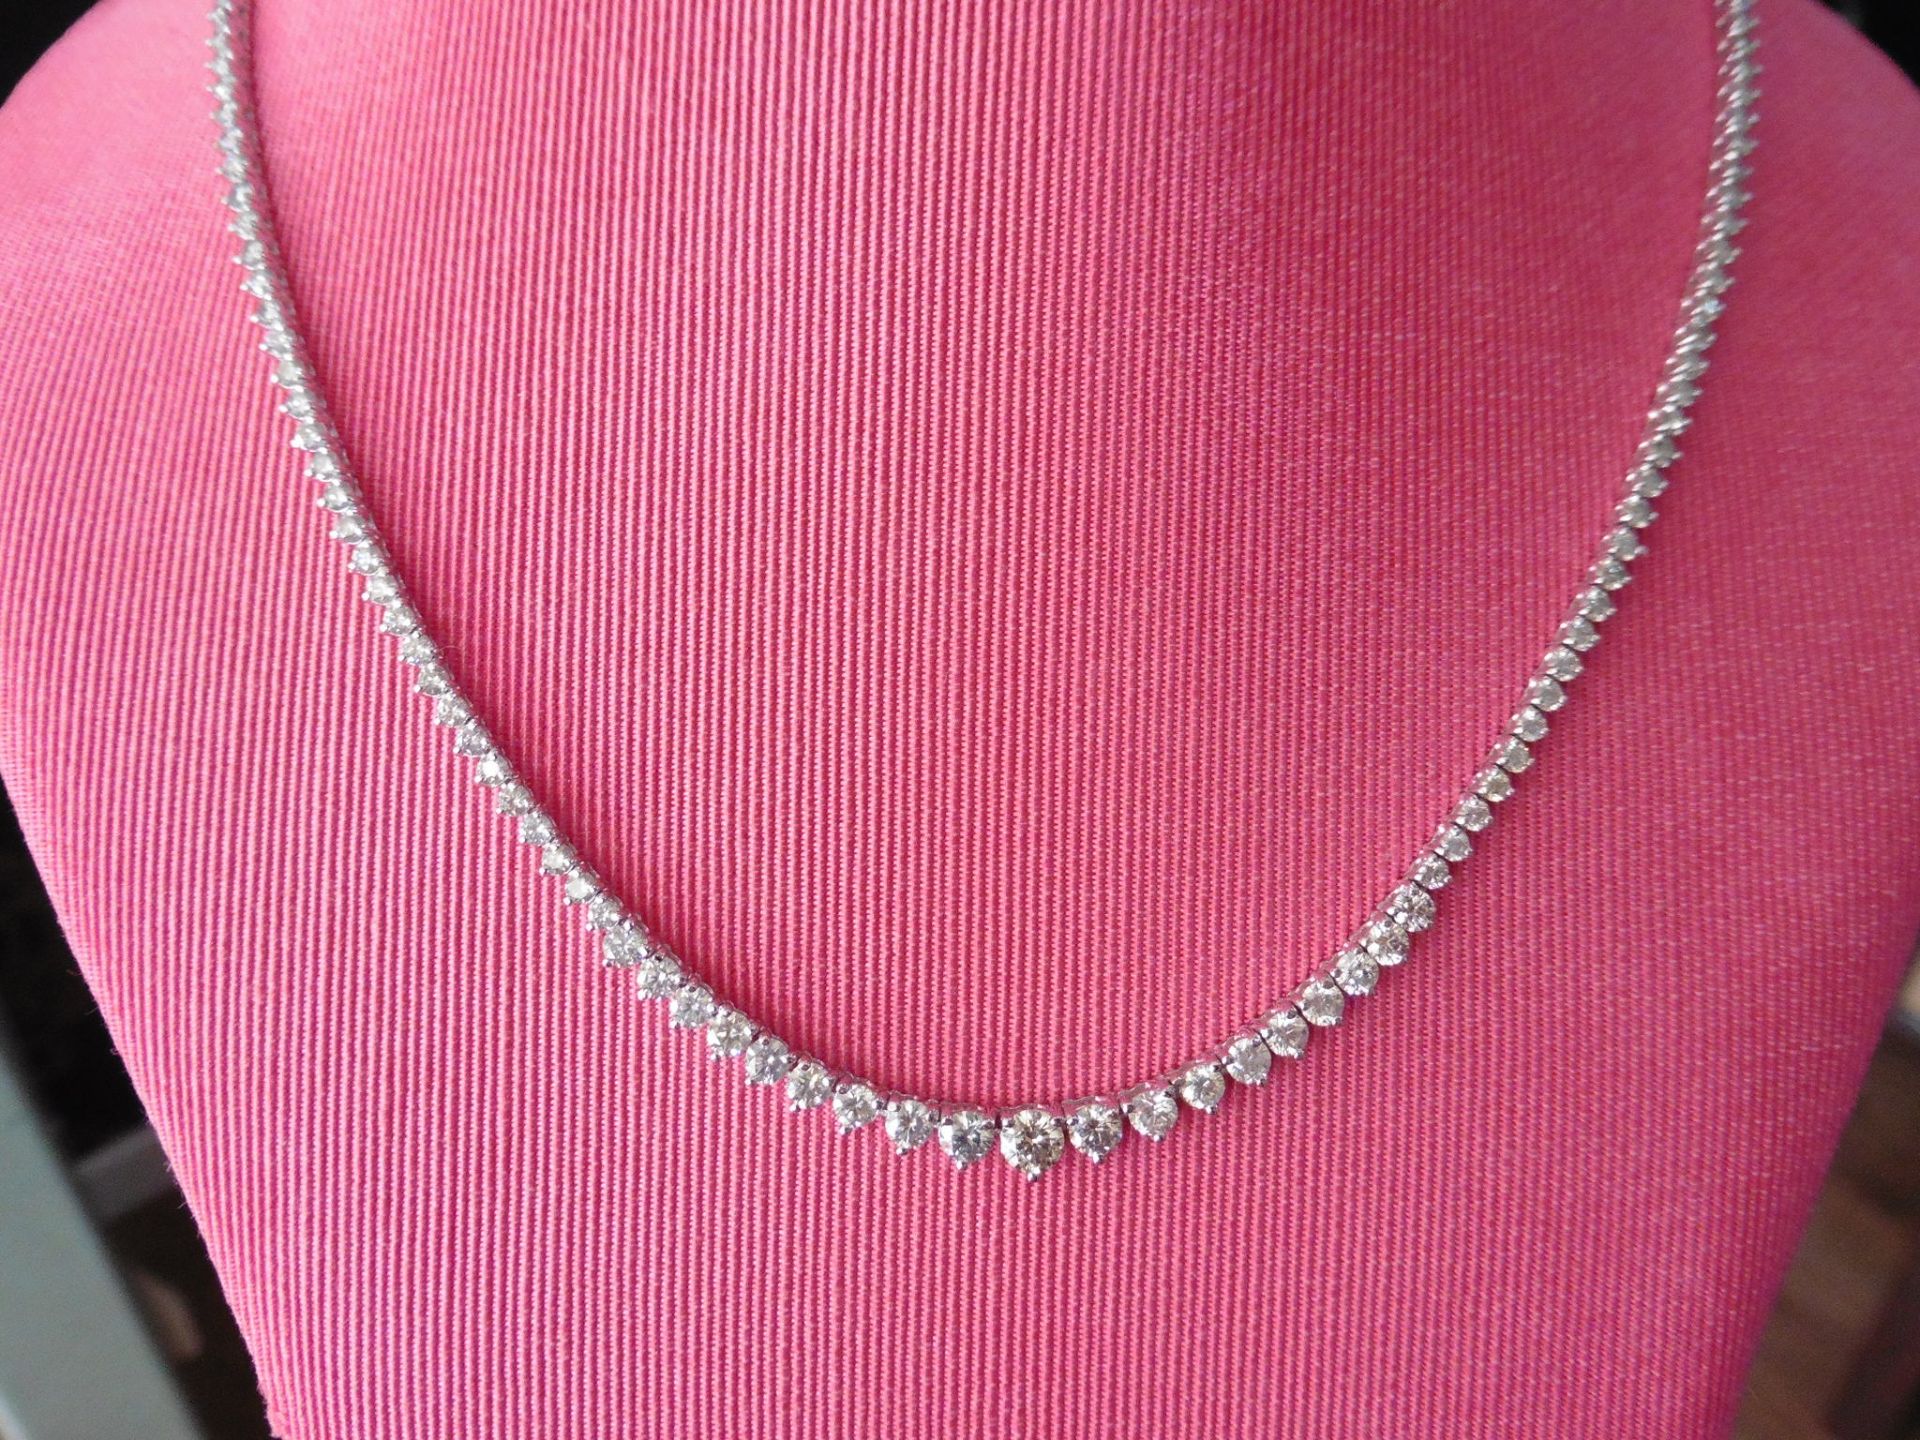 15ct Diamond tennis style necklace. 3 claw setting. Graduated diamonds, I colour, Si2 clarity - Image 2 of 3